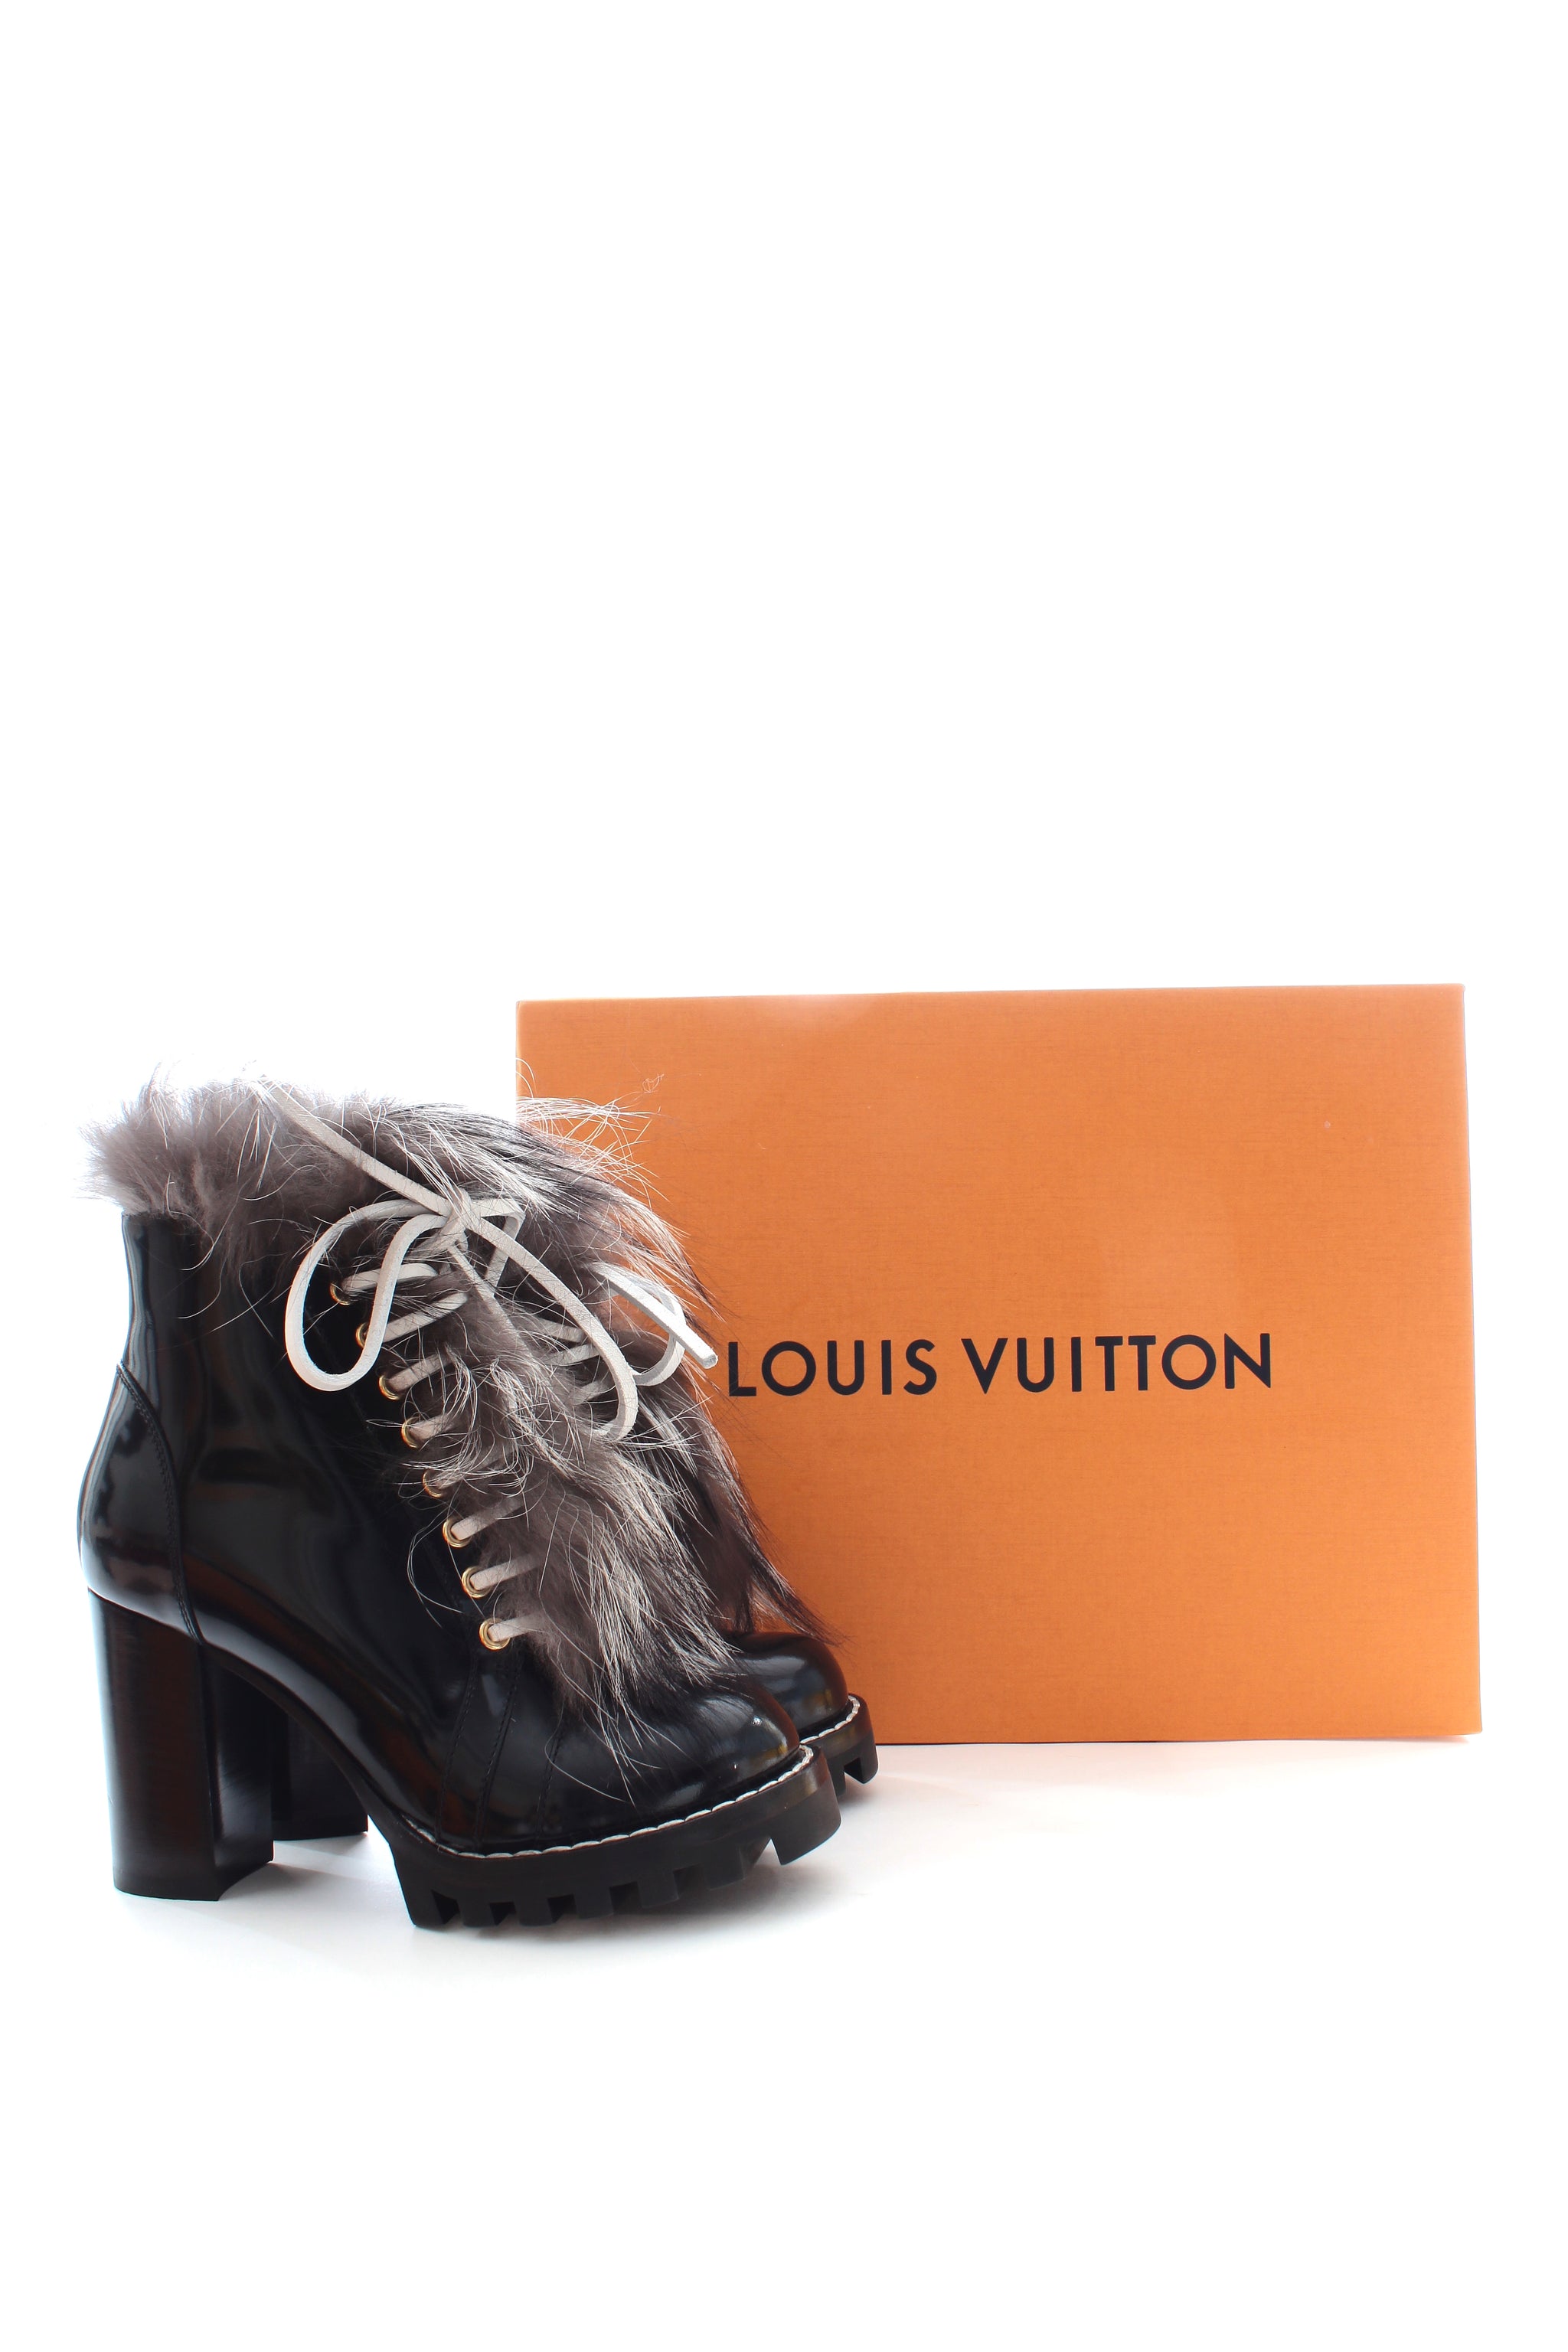 Louis Vuitton Fur Patent Leather Star Trail Ankle Boots - Closet Upgrade